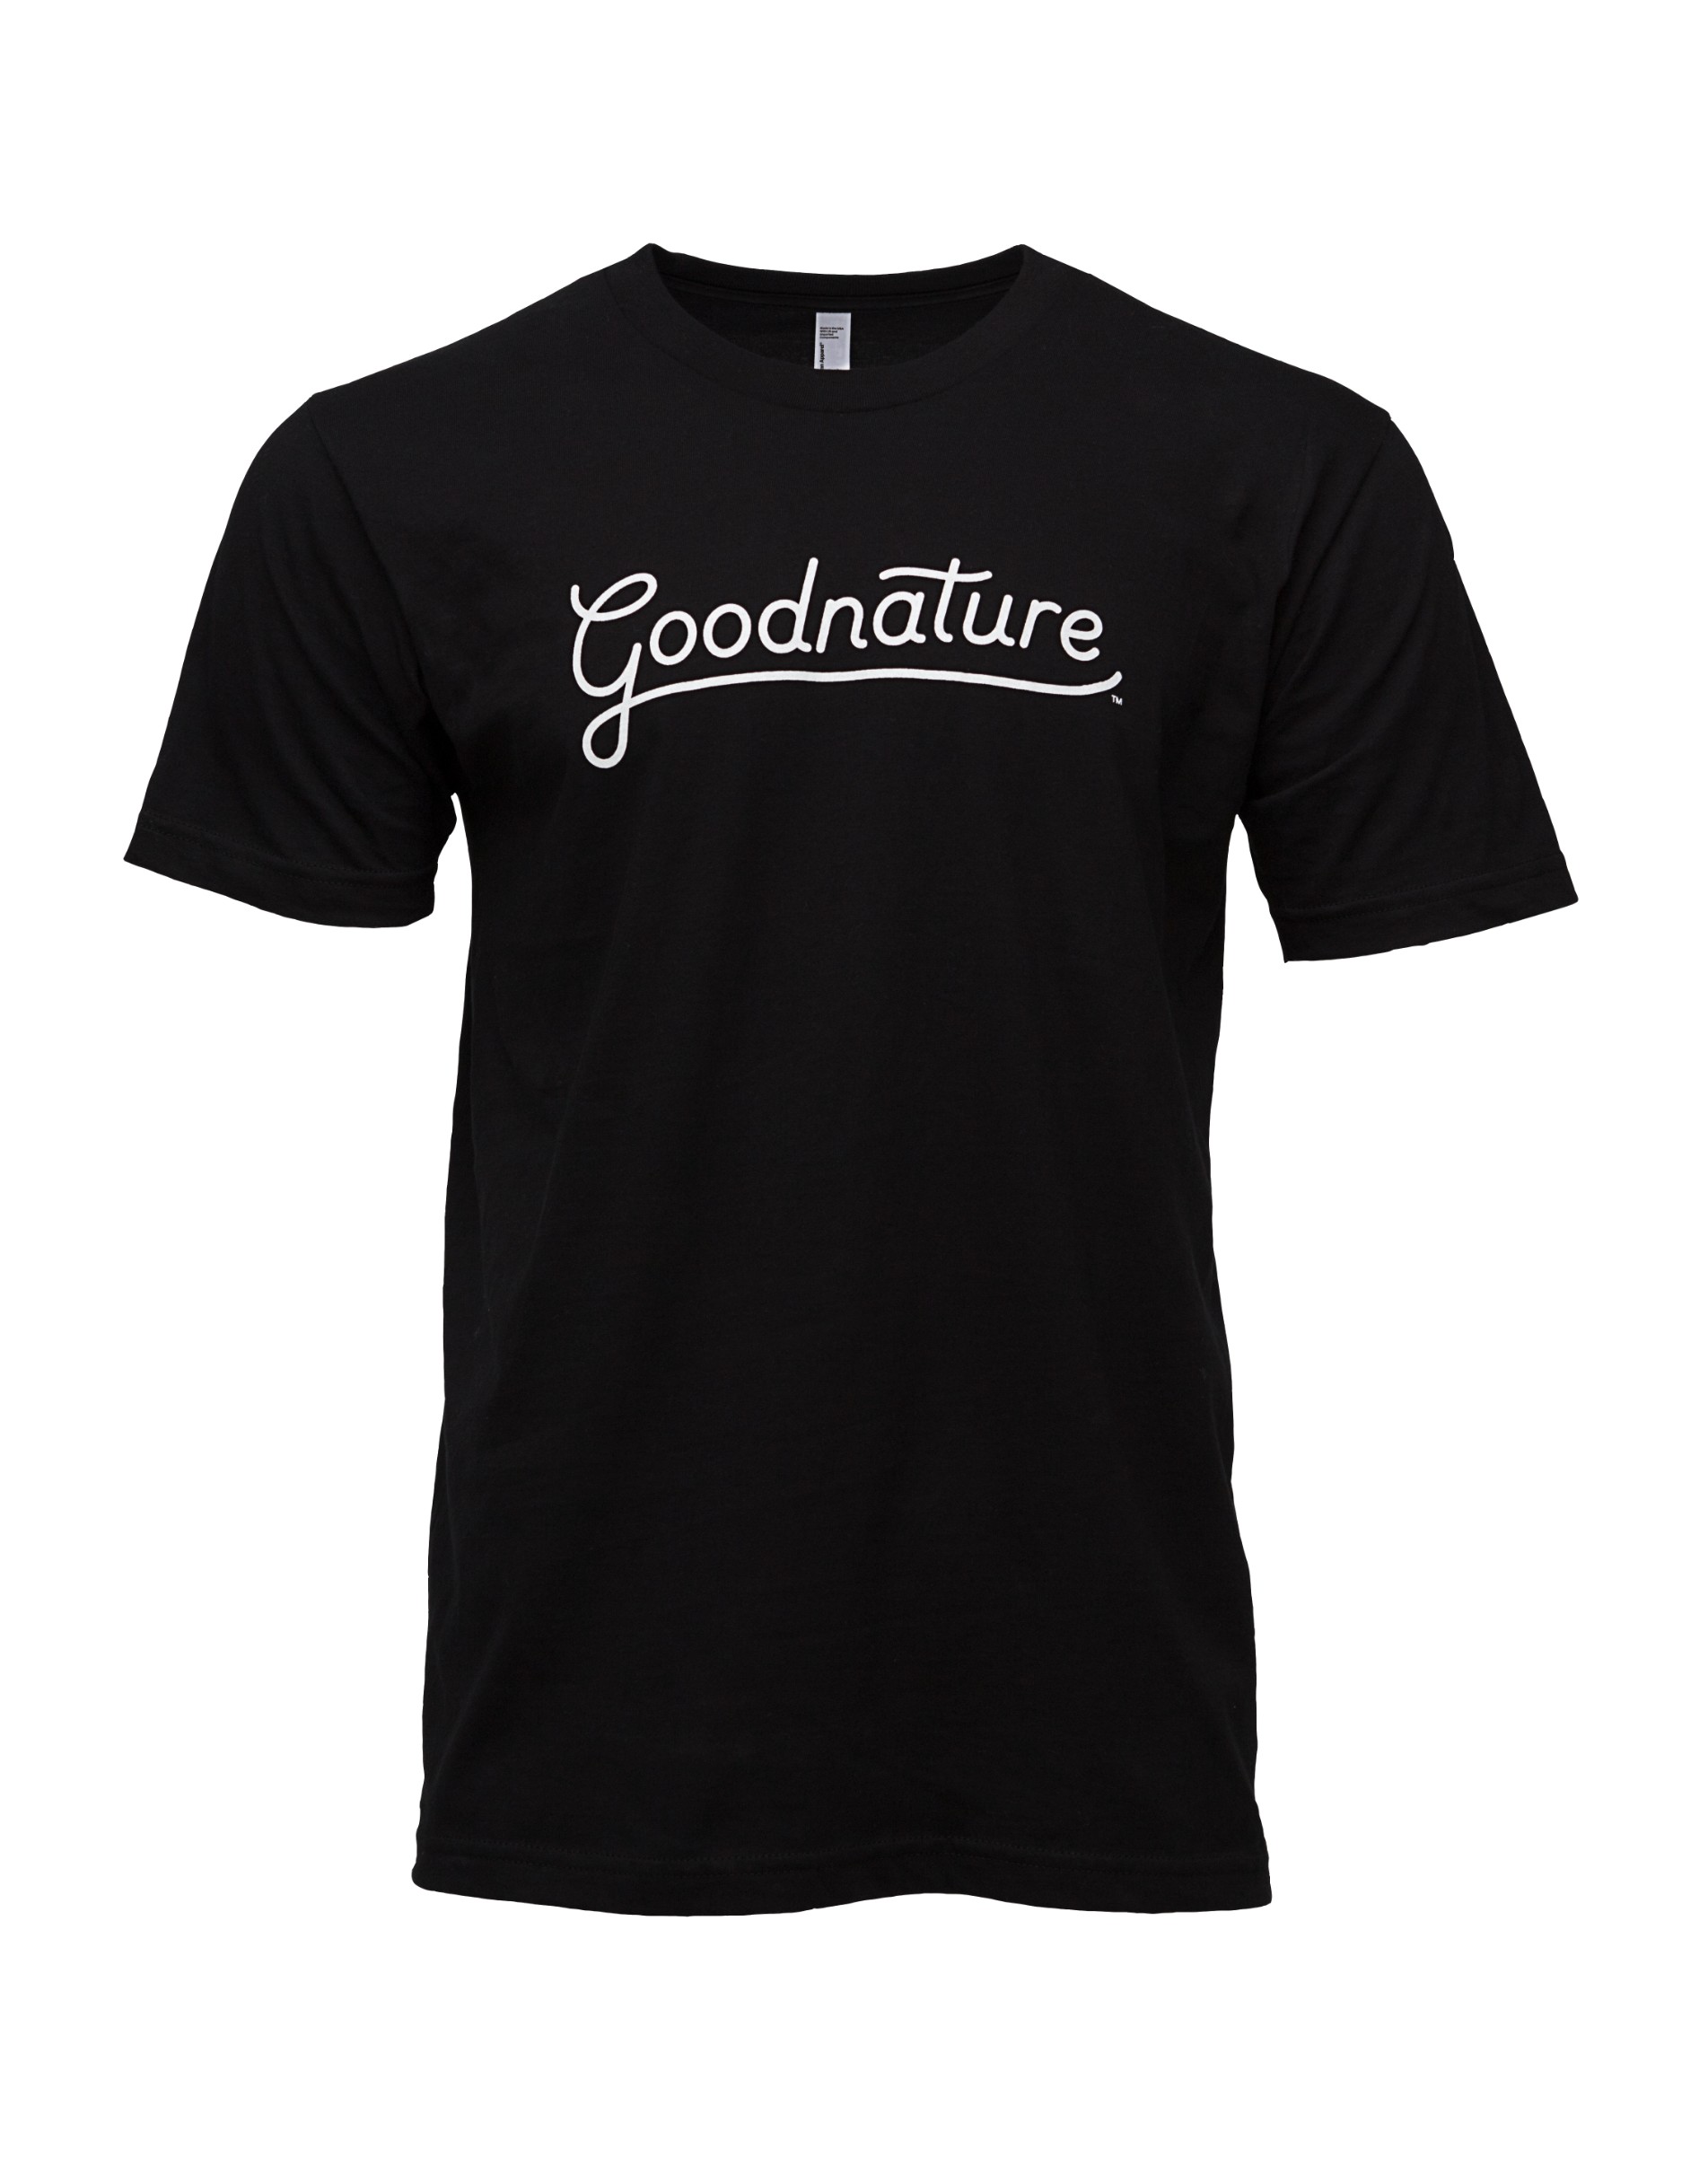 Goodnature Official Factory Issue Black Tee